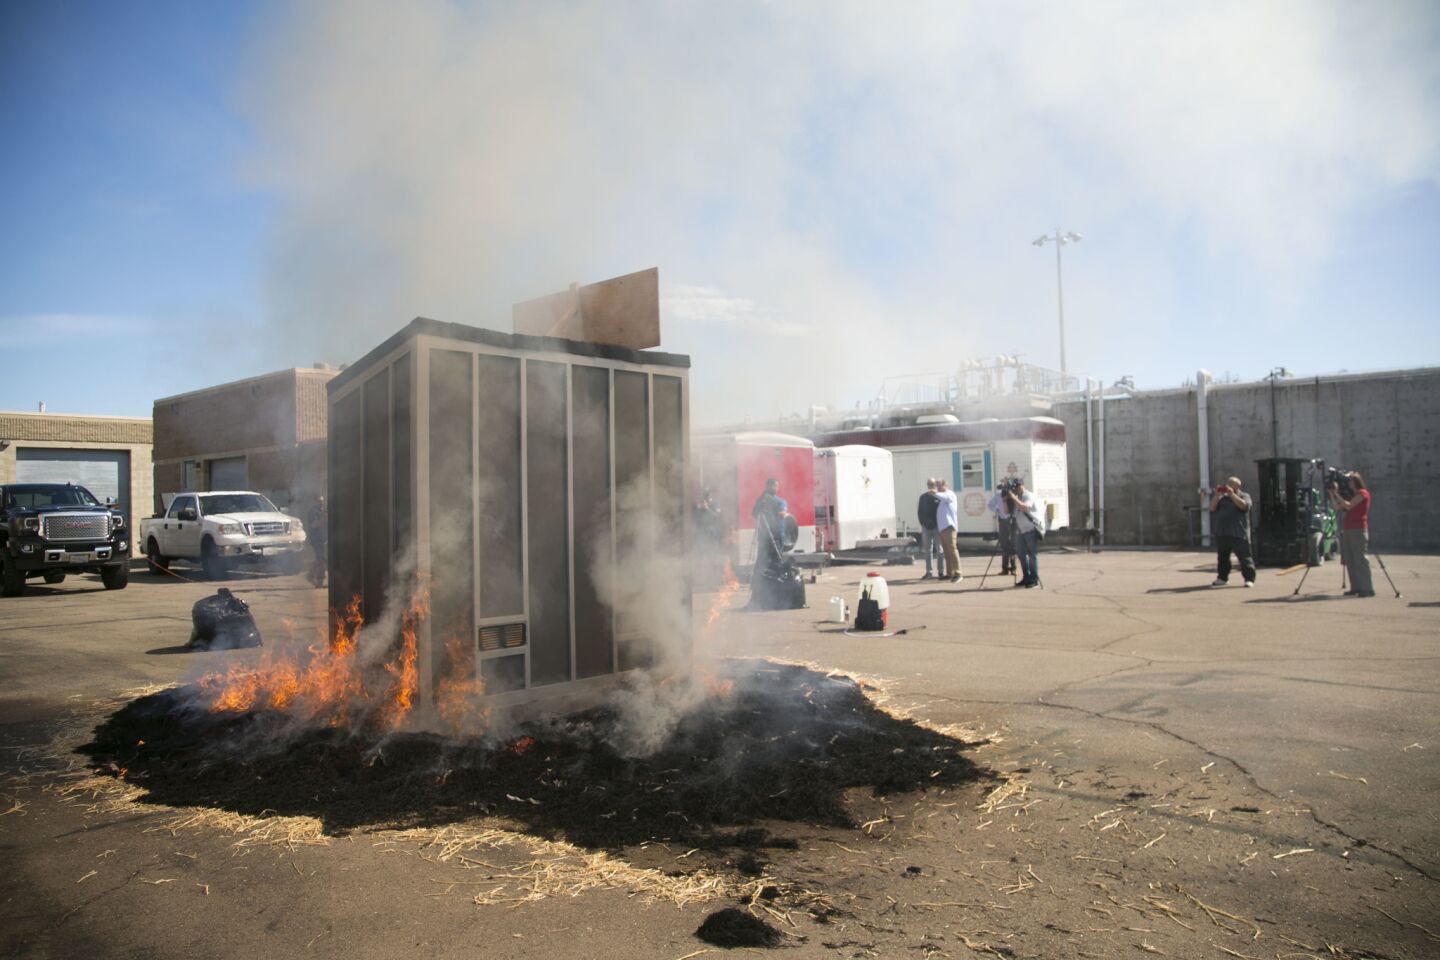 M-Fire Suppression Inc. is a company manufacturing a shed that is fire proof for protecting valuables from wildfire. They did a demonstration on Tuesday at the San Diego Fire Academy.